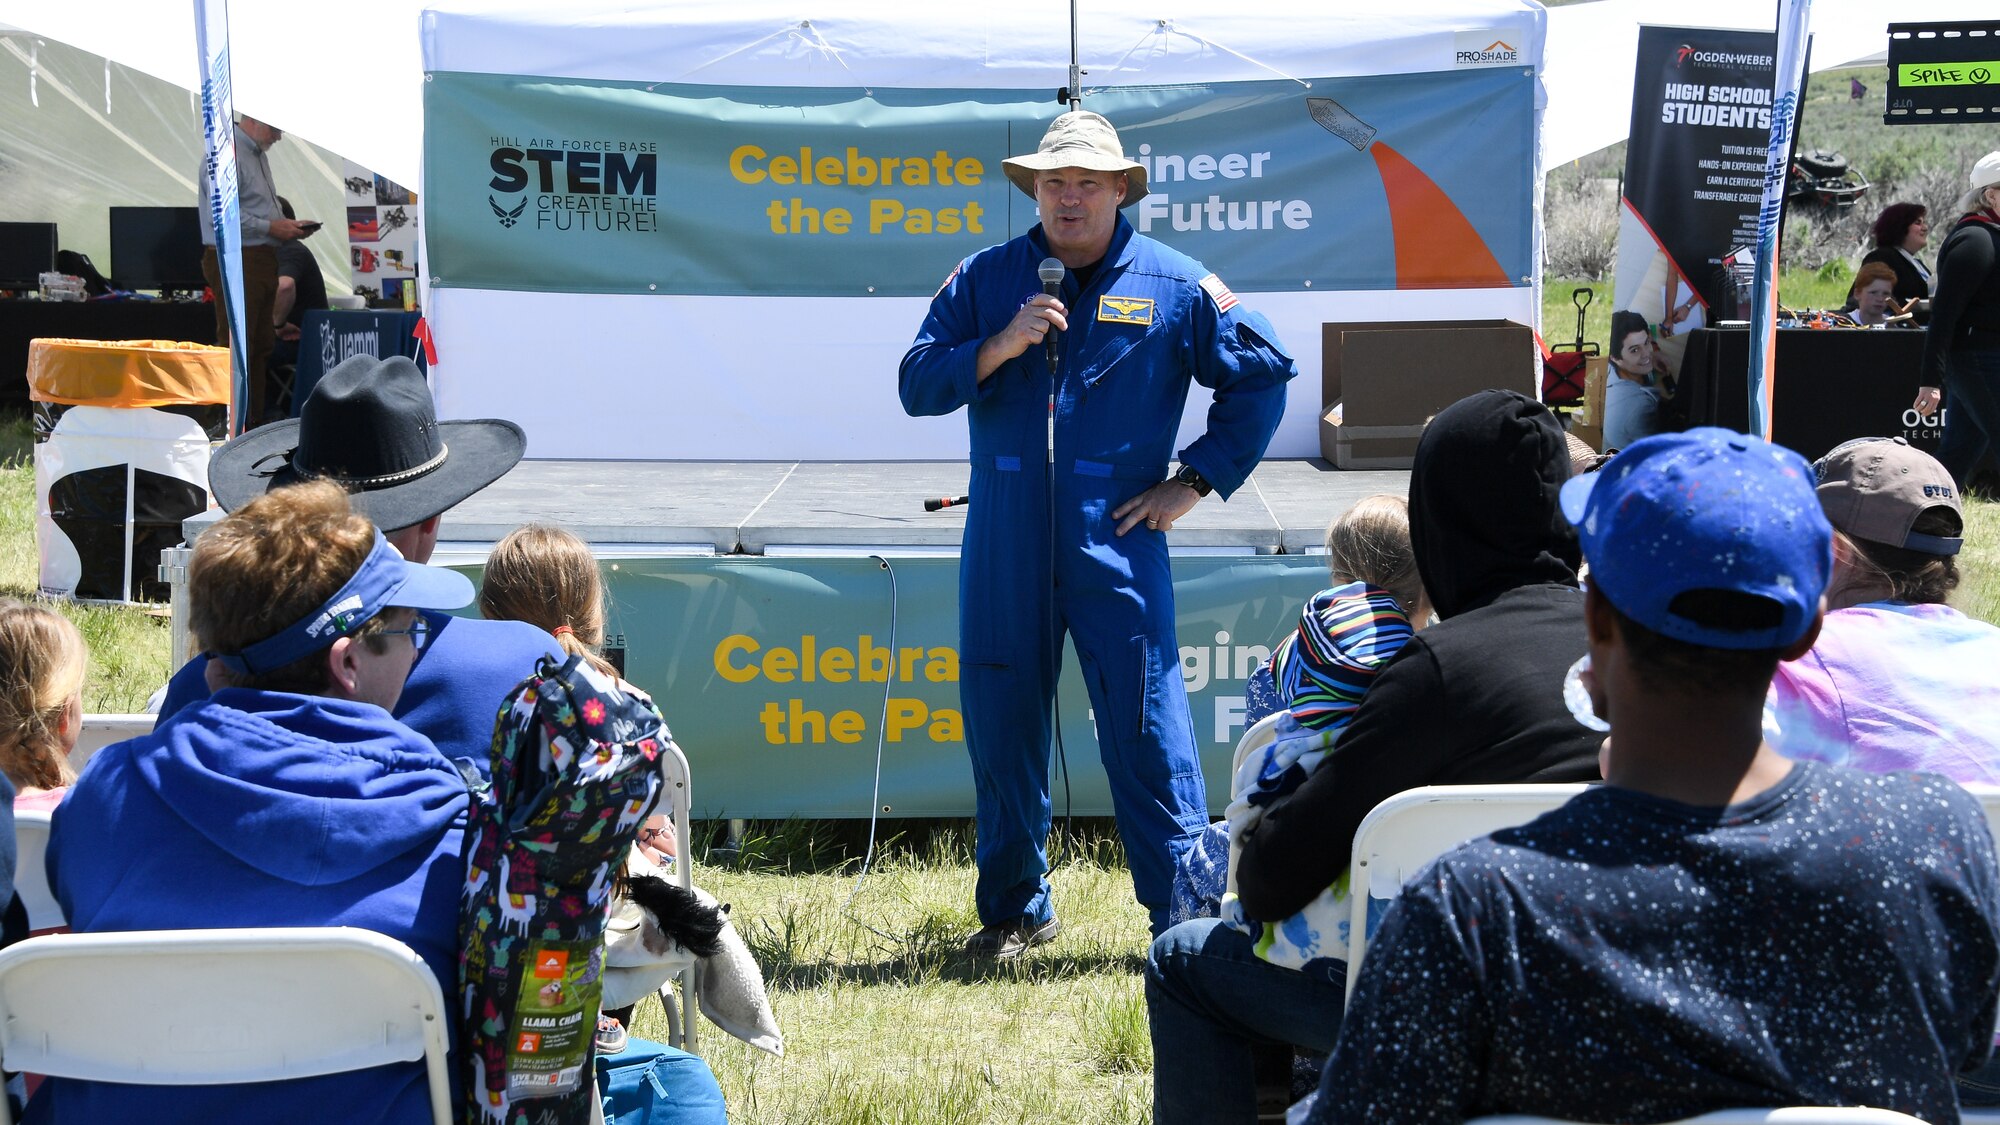 Astronaut Scott Tingle speaks about his experiences on the International Space Station during the Golden Spike Sesquicentennial Celebration May 10, 2019, at Promontory Summit, Utah. Event festivities included an “Innovation Summit” that focused on STEM-related activities hosted by Hill Air Force Base, industry, and secondary and higher education. (U.S. Air Force photo by R. Nial Bradshaw)